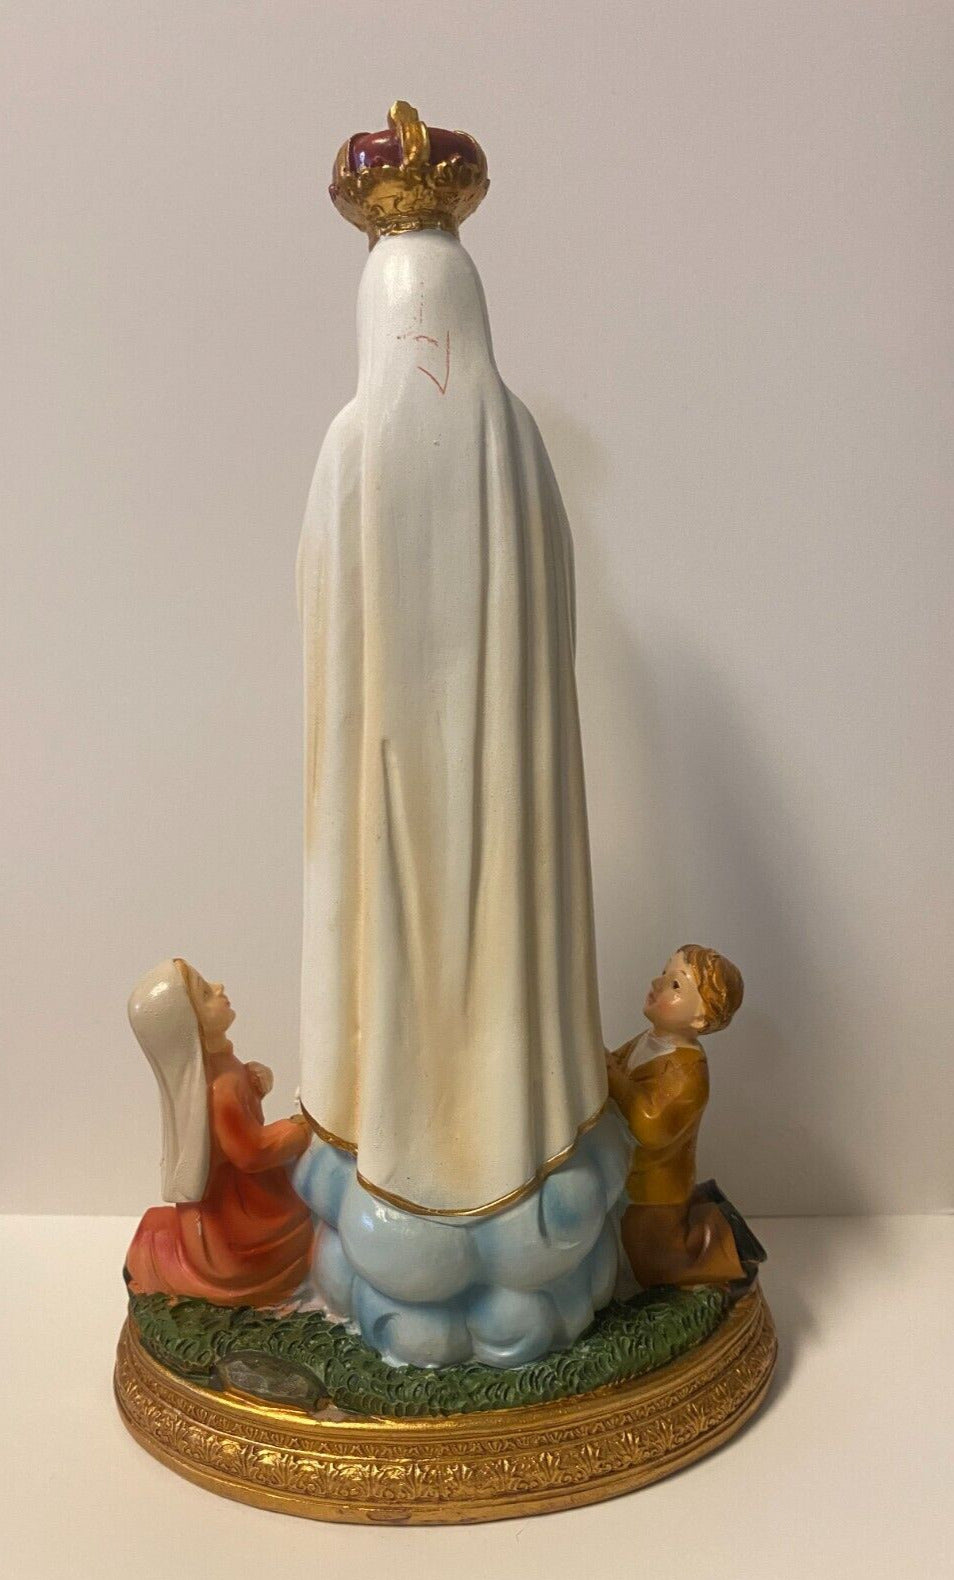 Our Lady of Fatima with Children 8" Statue, New